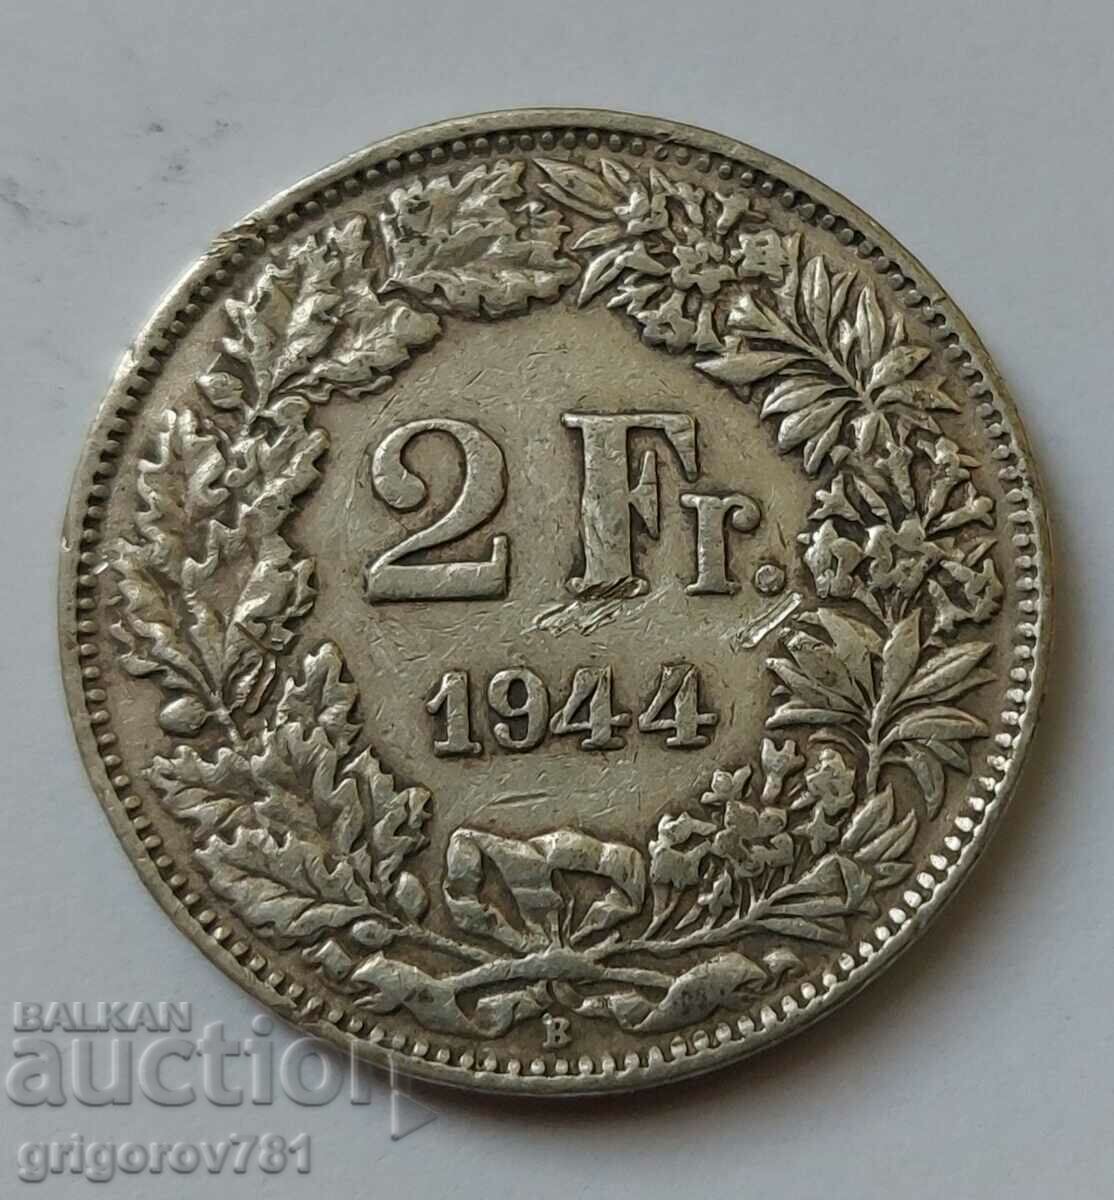 2 Francs Silver Switzerland 1944 B - Silver Coin #5